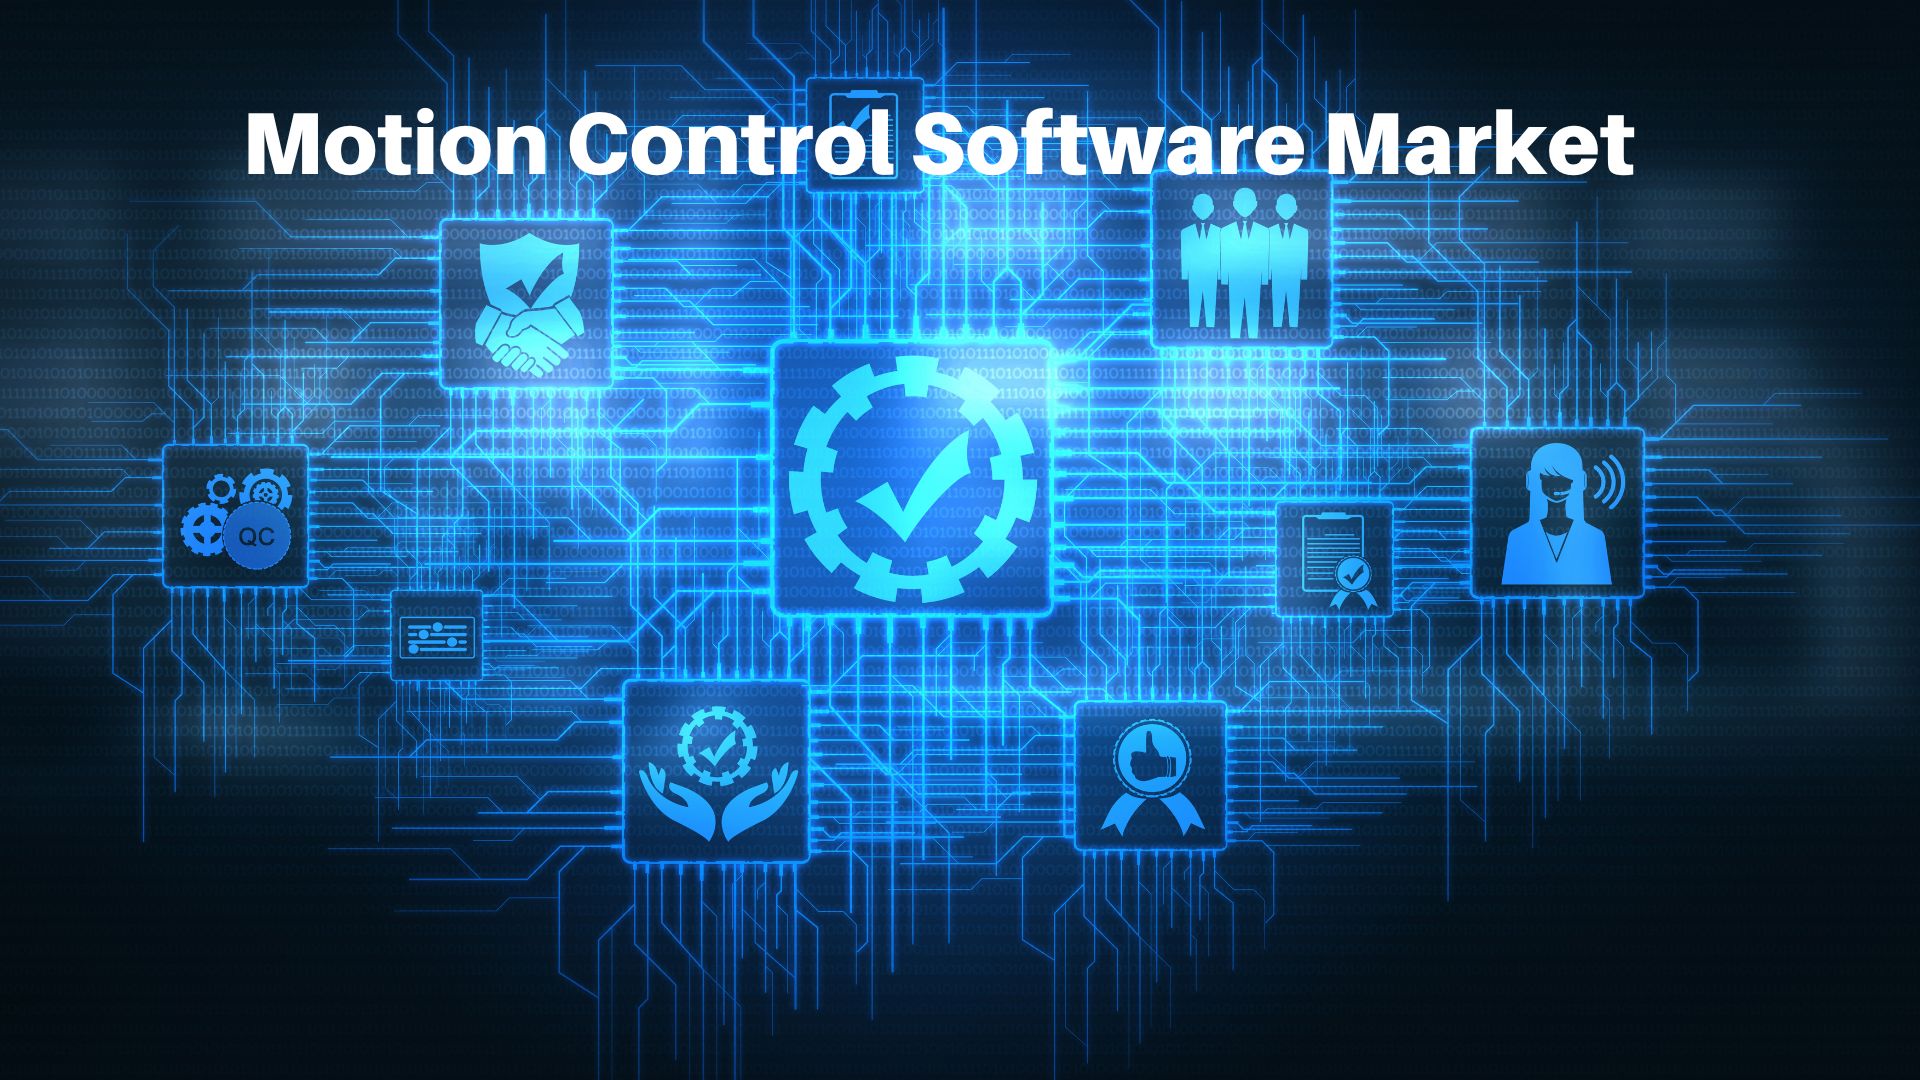 Motion Control Software Market Size is expected to reach USD 3.09 Billion by 2033